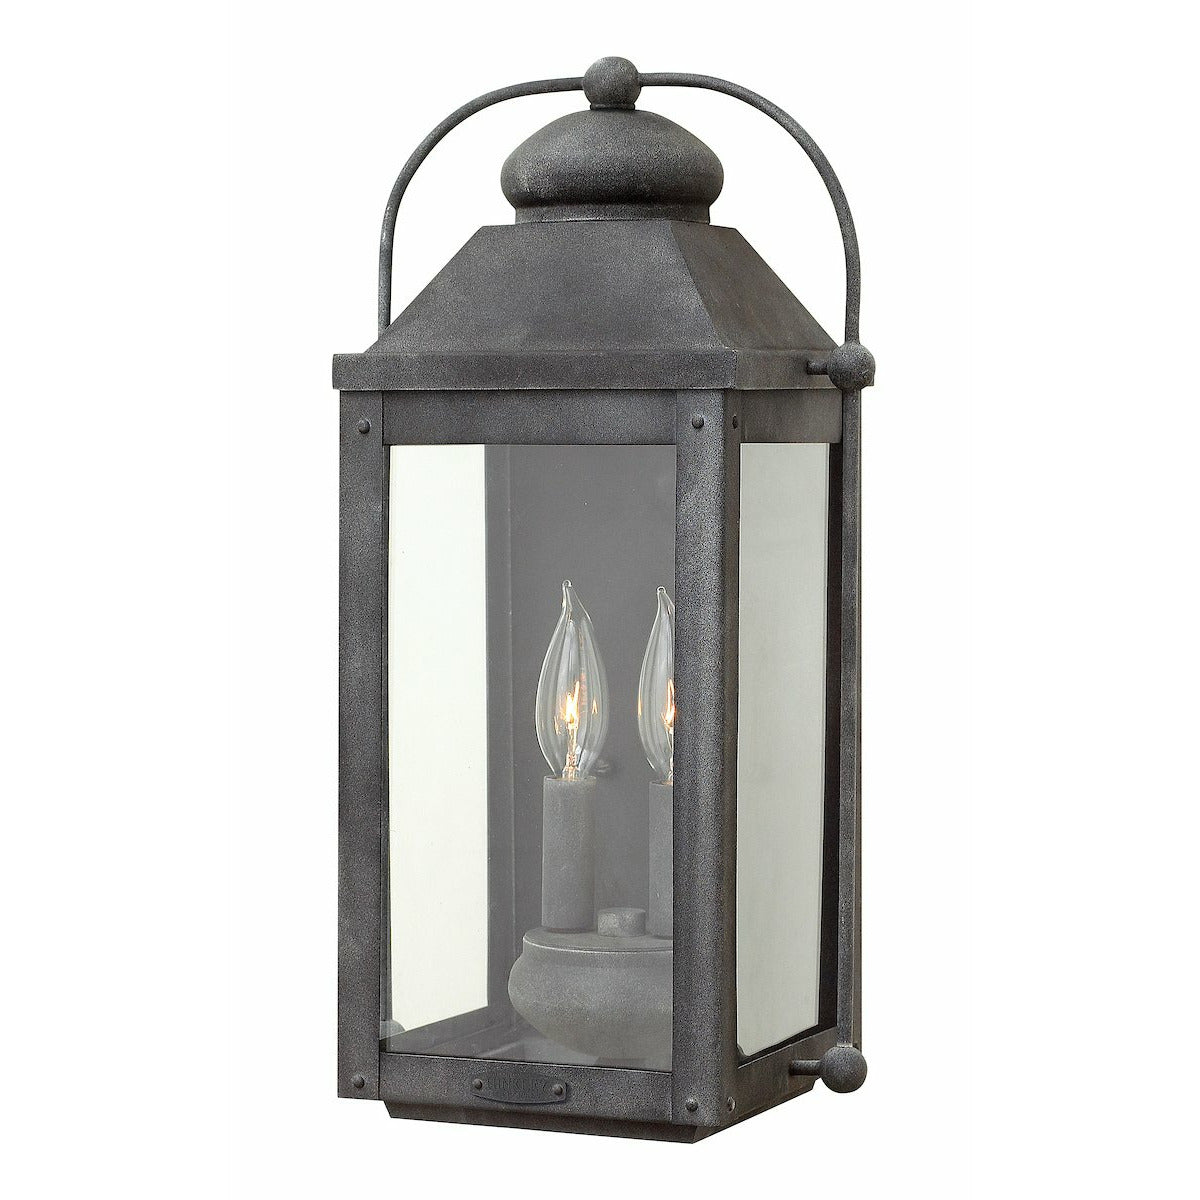 Anchorage Outdoor Wall Light Aged Zinc